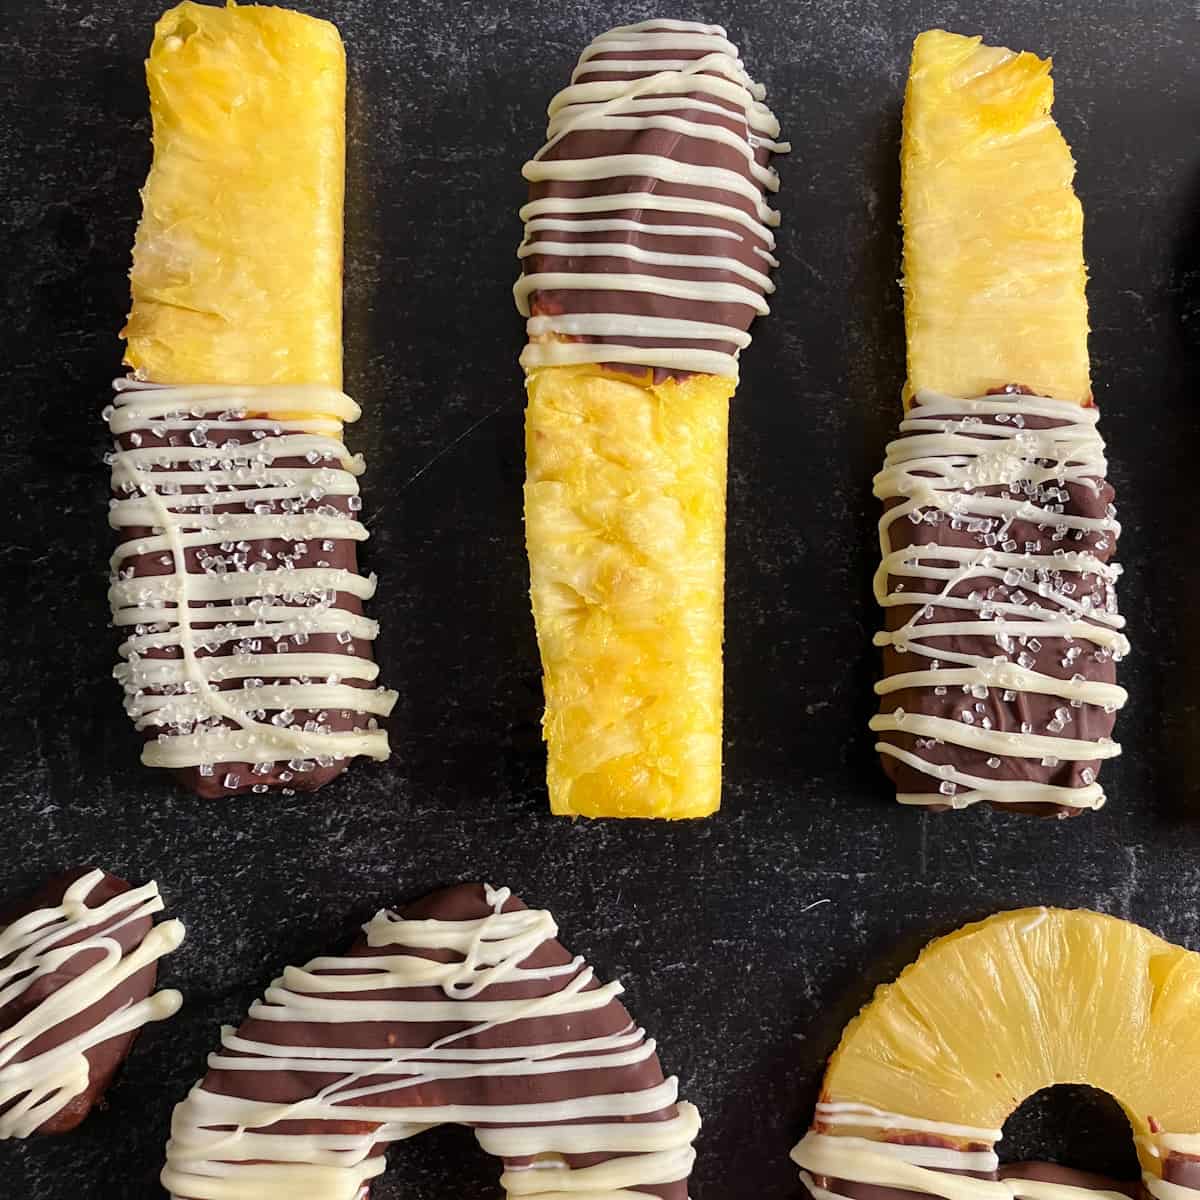 pineapple dipped in chocolate